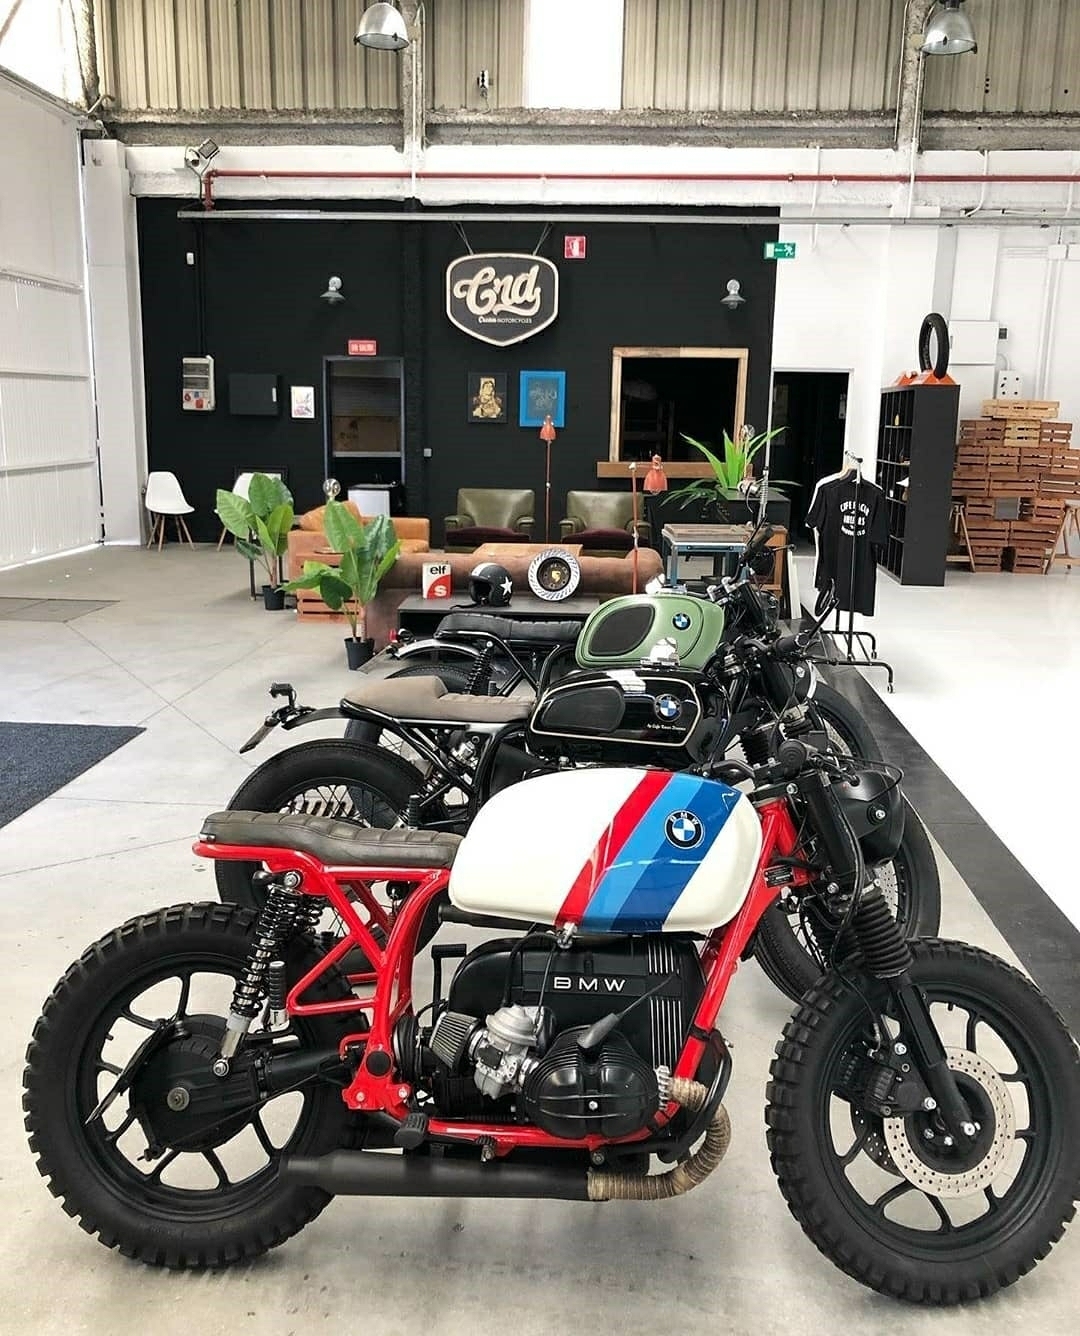 bmw motorcycle collection